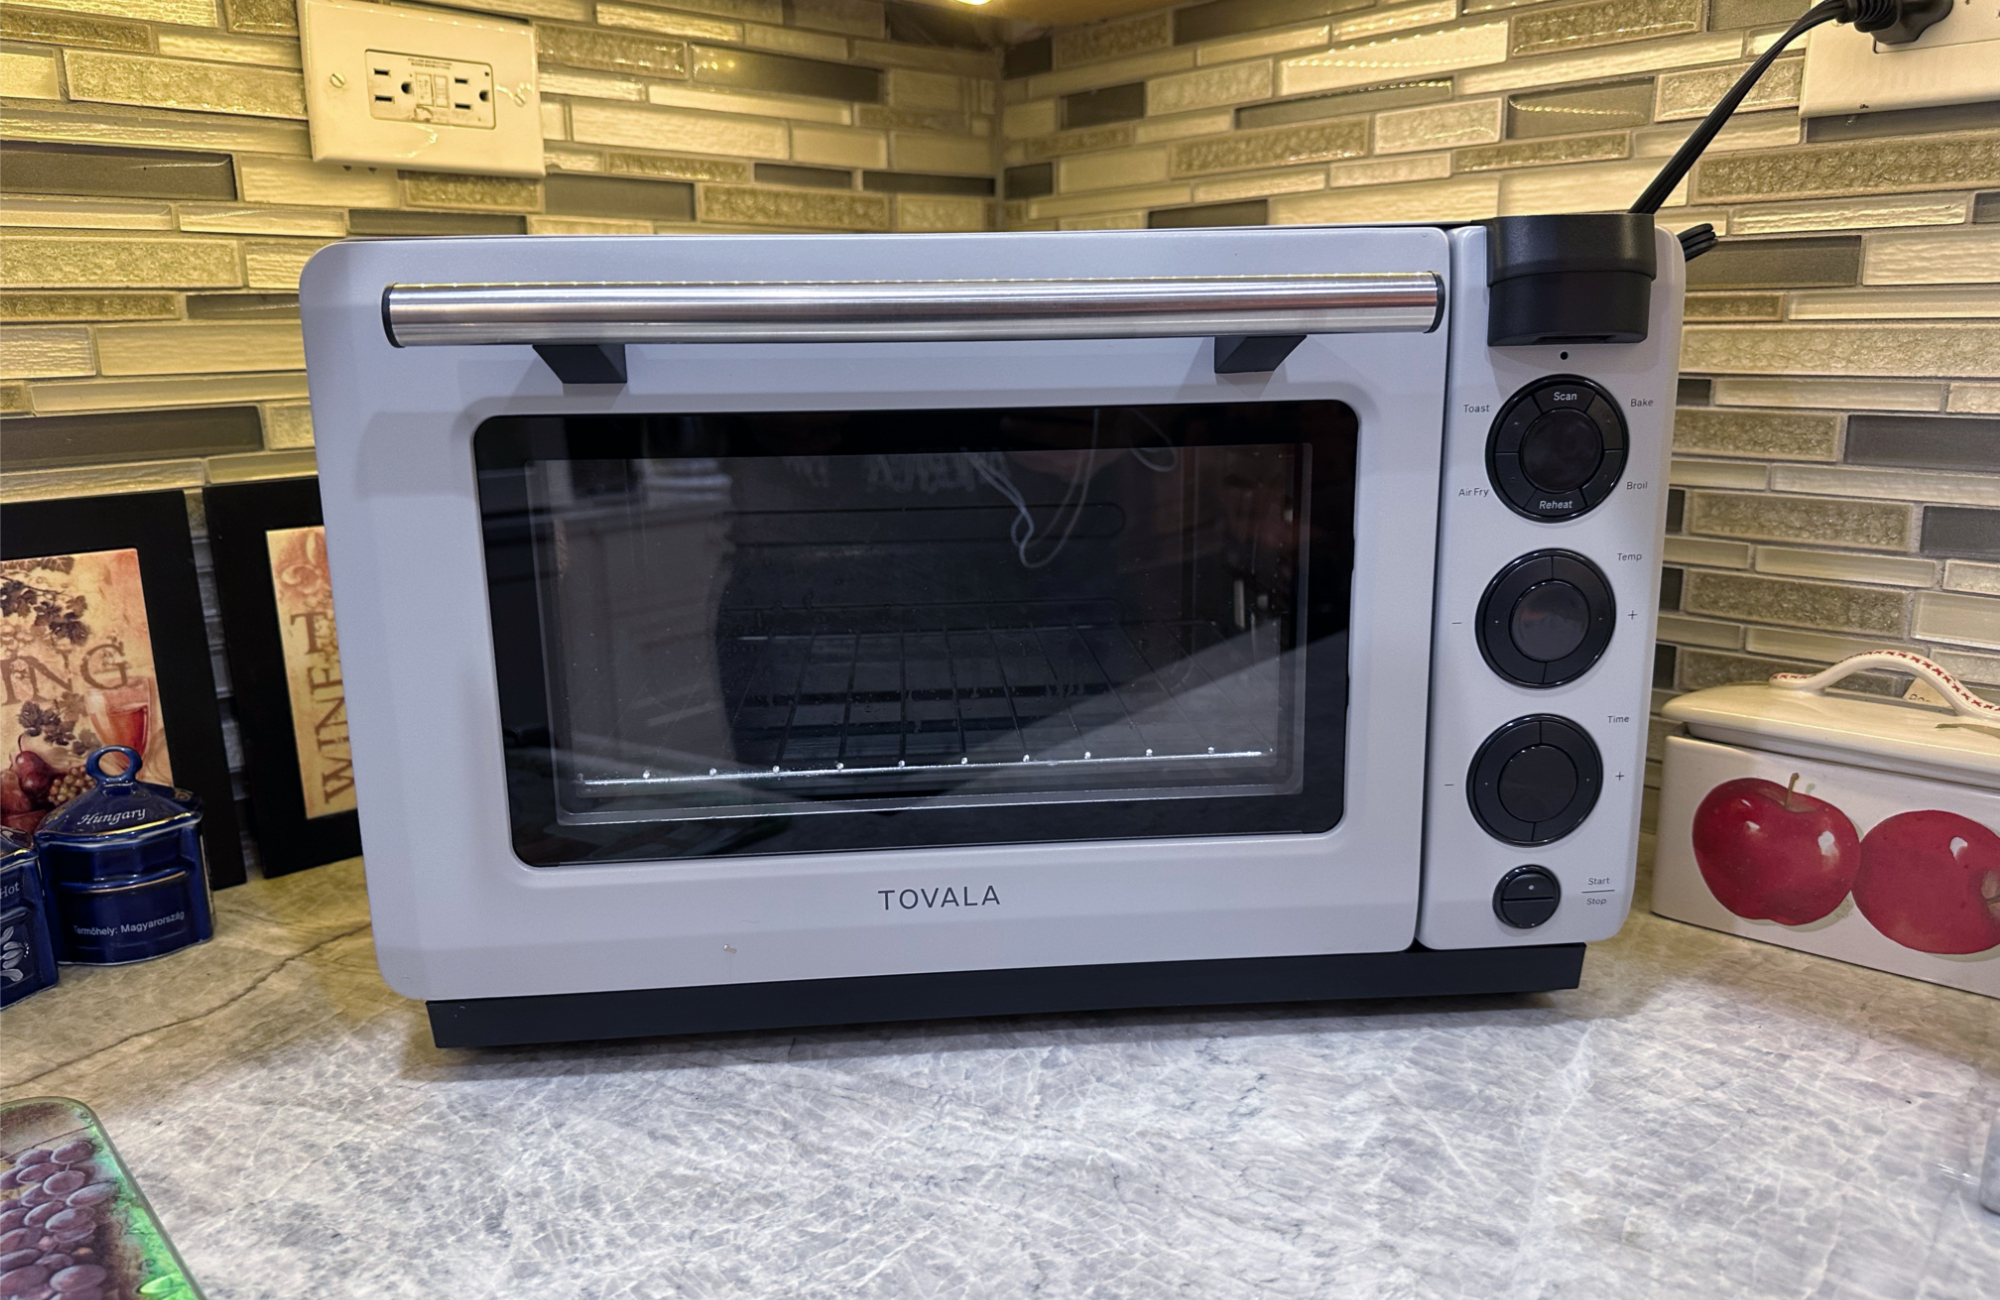  Tovala Smart Oven Pro, 6-in-1 Countertop Convection